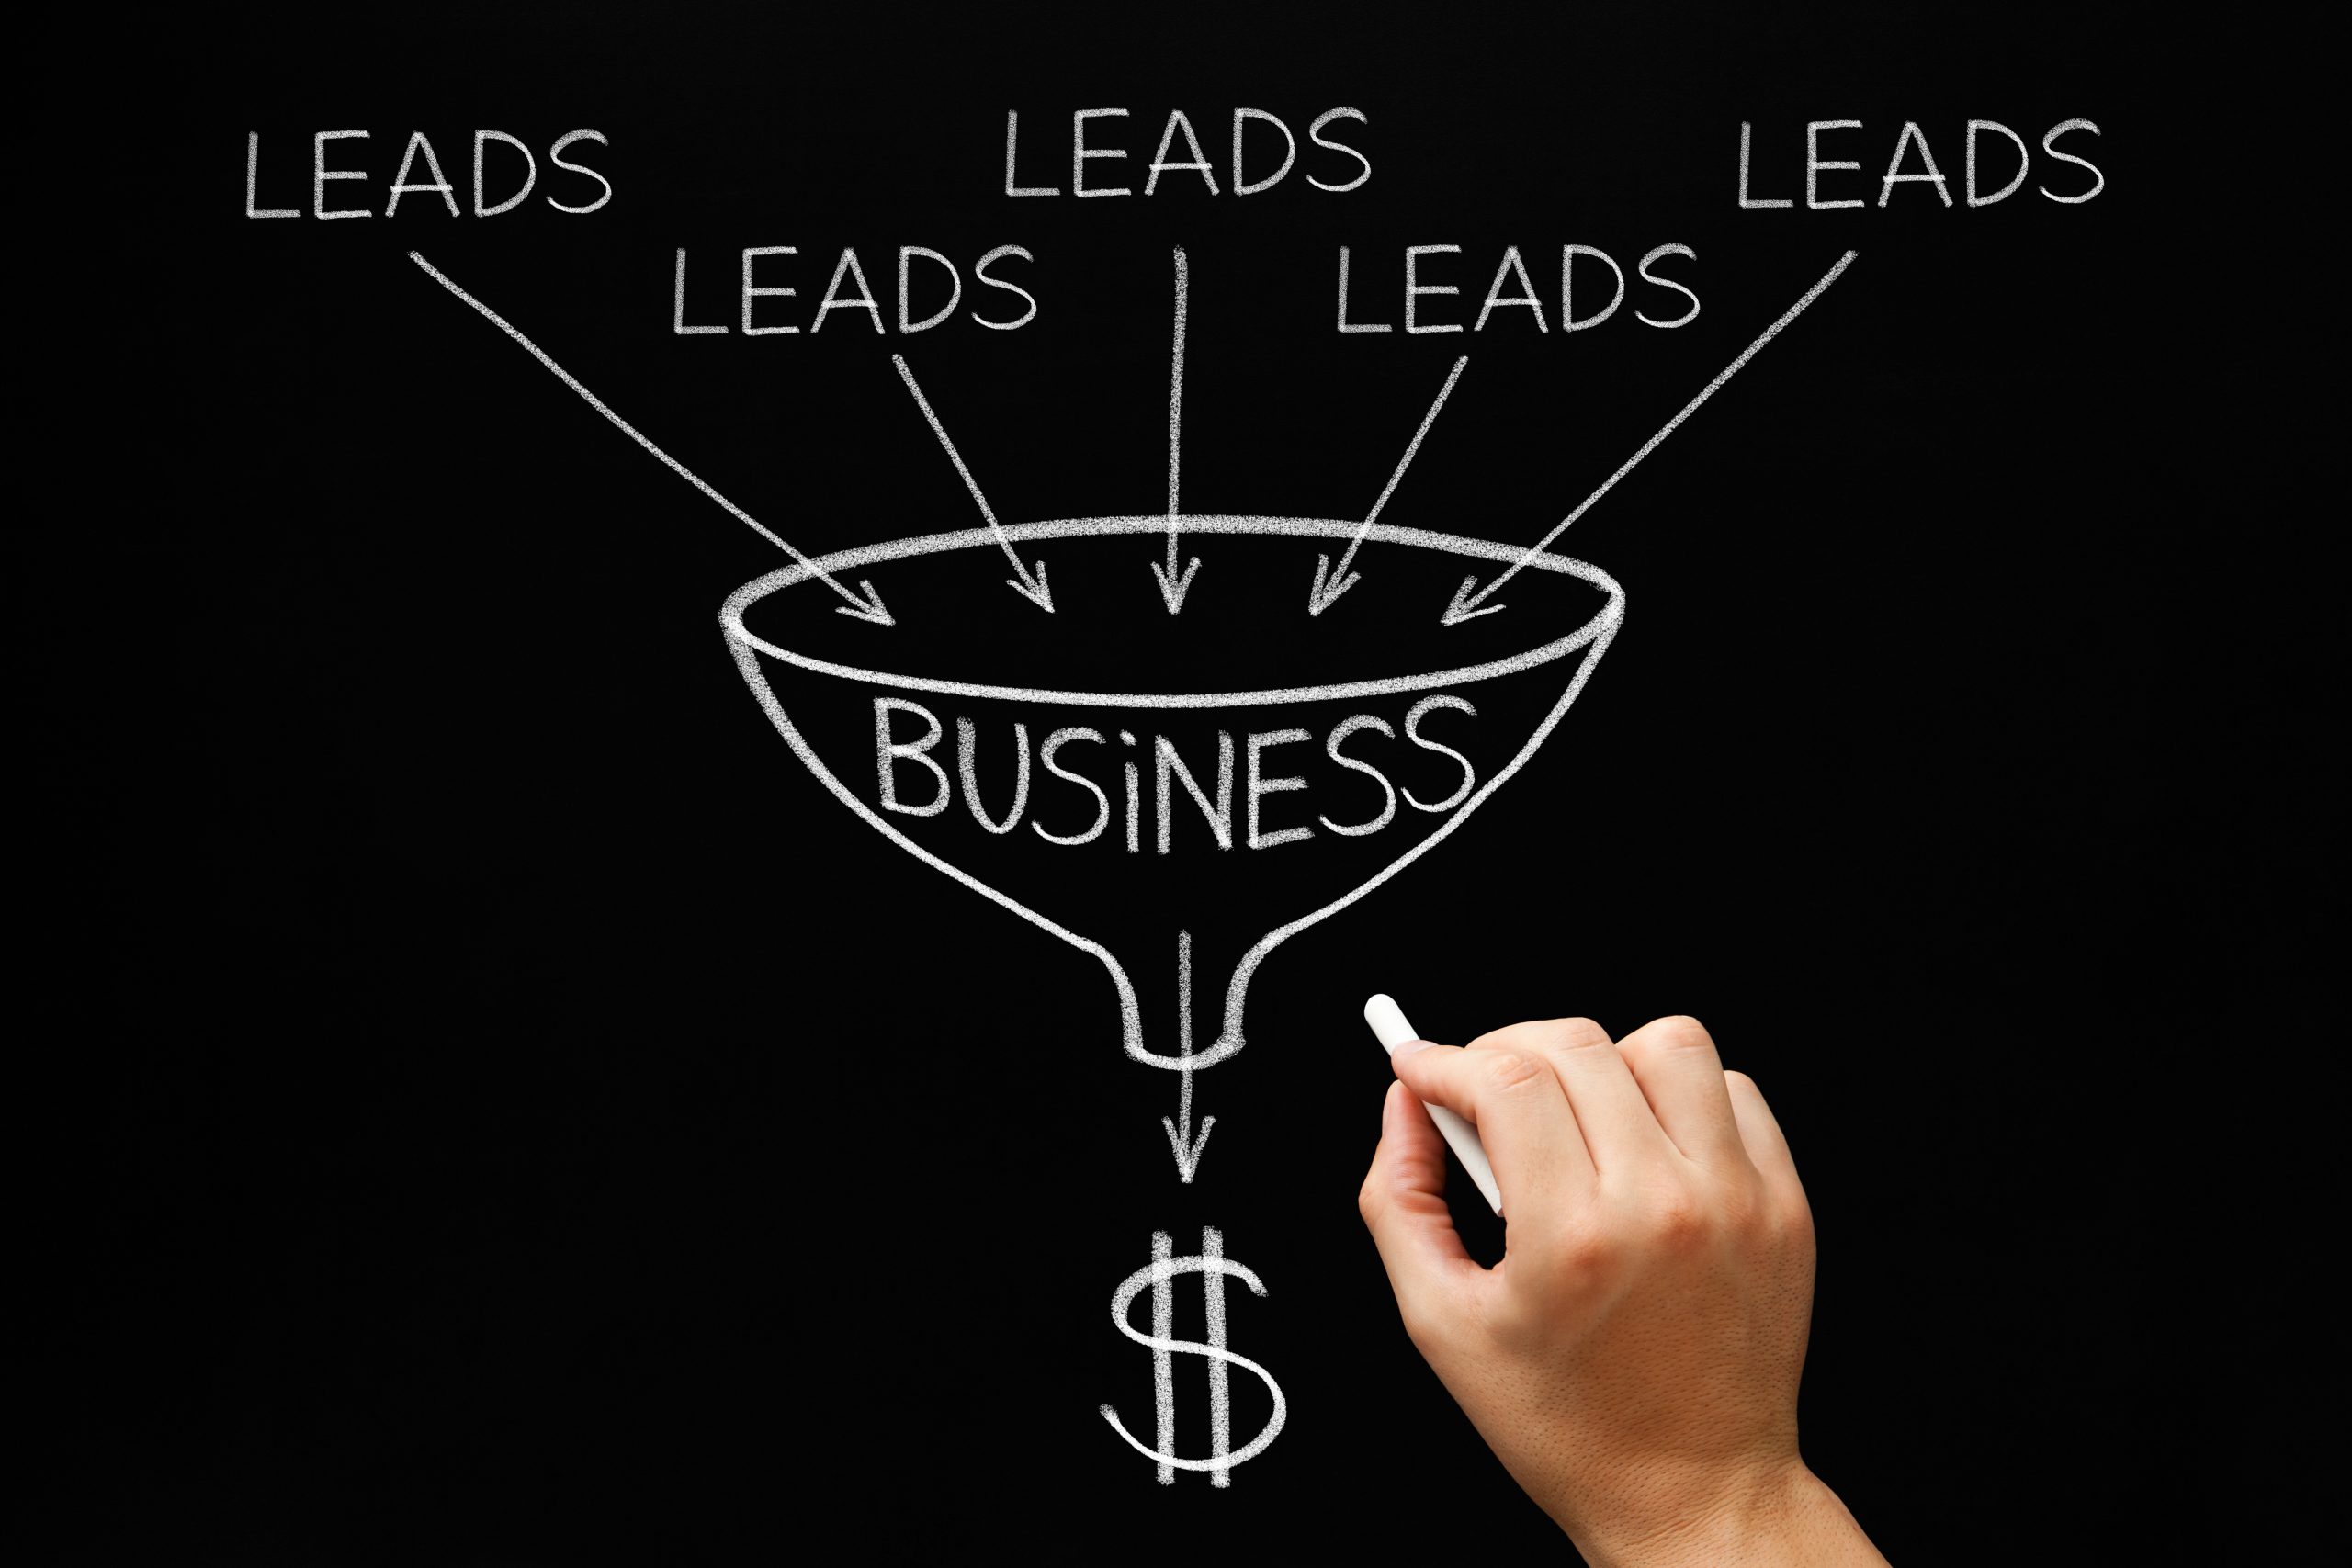 5 Lead Generation Issues Most Small Businesses Face and How to Solve Them